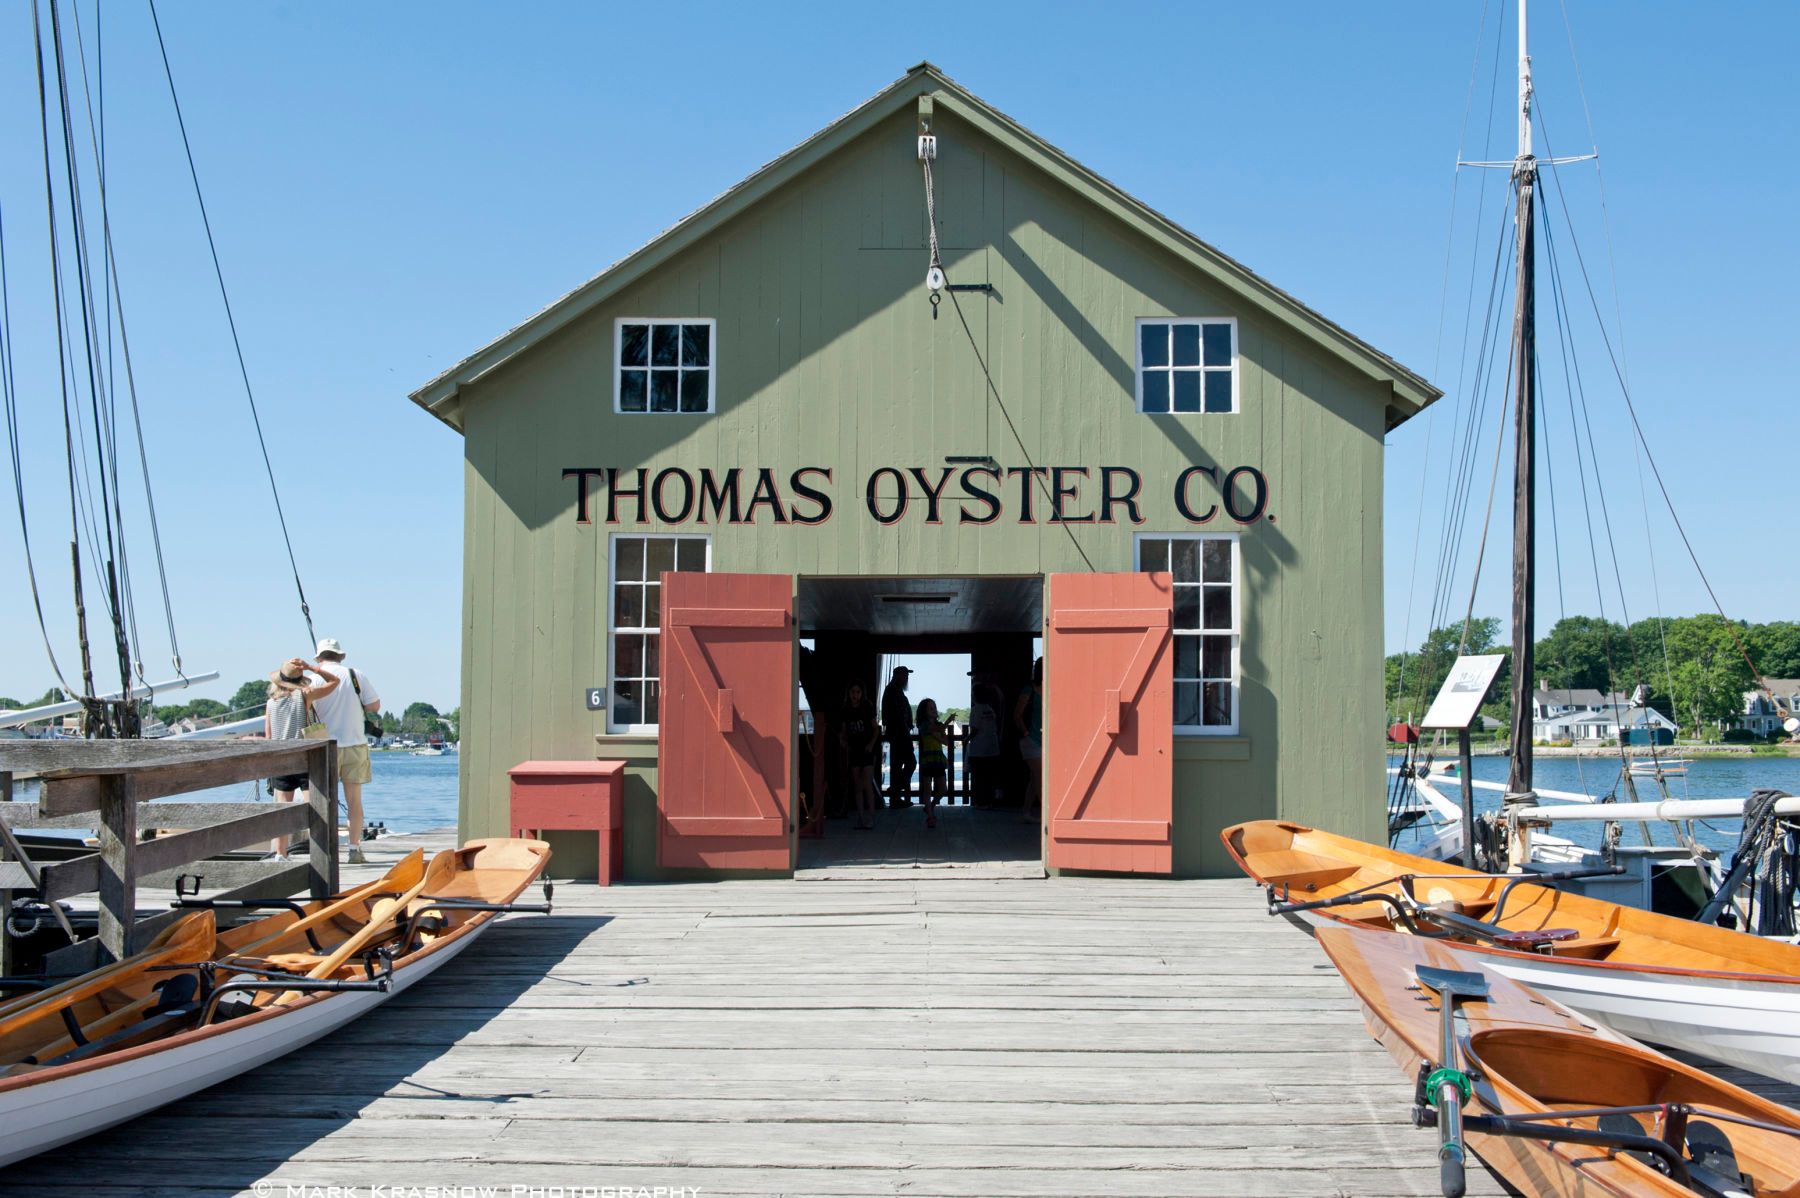 Thomas Oyster Company at Mystic Seaport in Mystic, CT